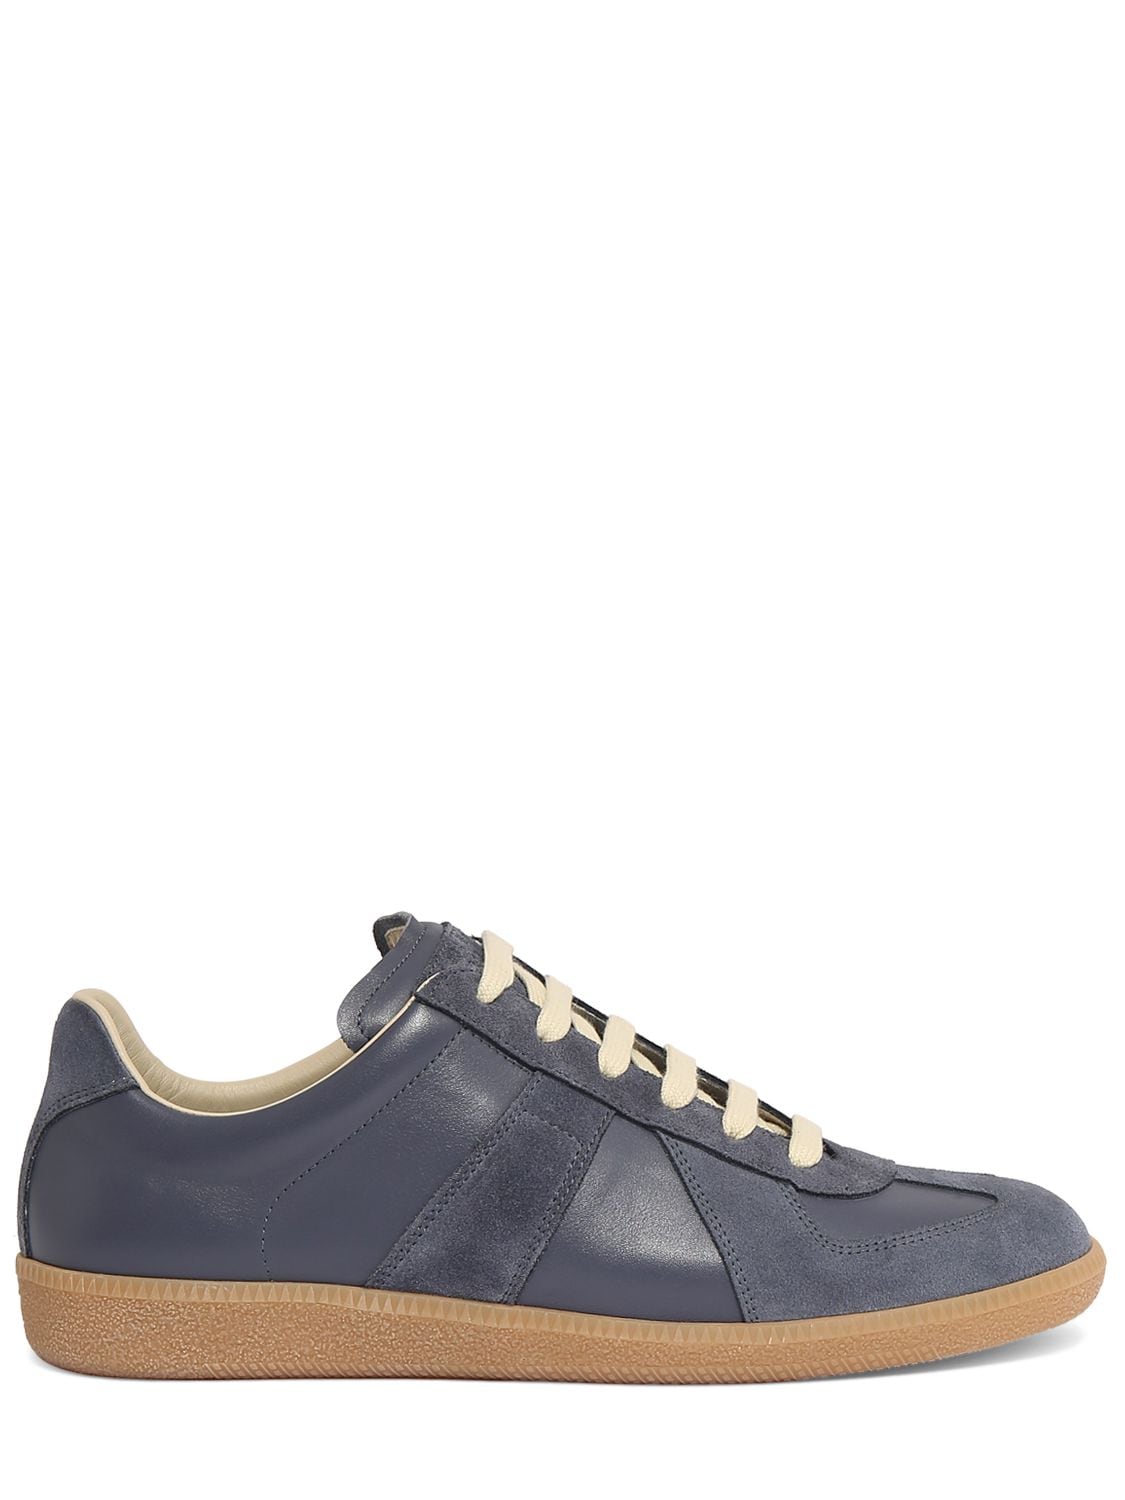 Shop Maison Margiela Replica Leather Sneakers In Pewter